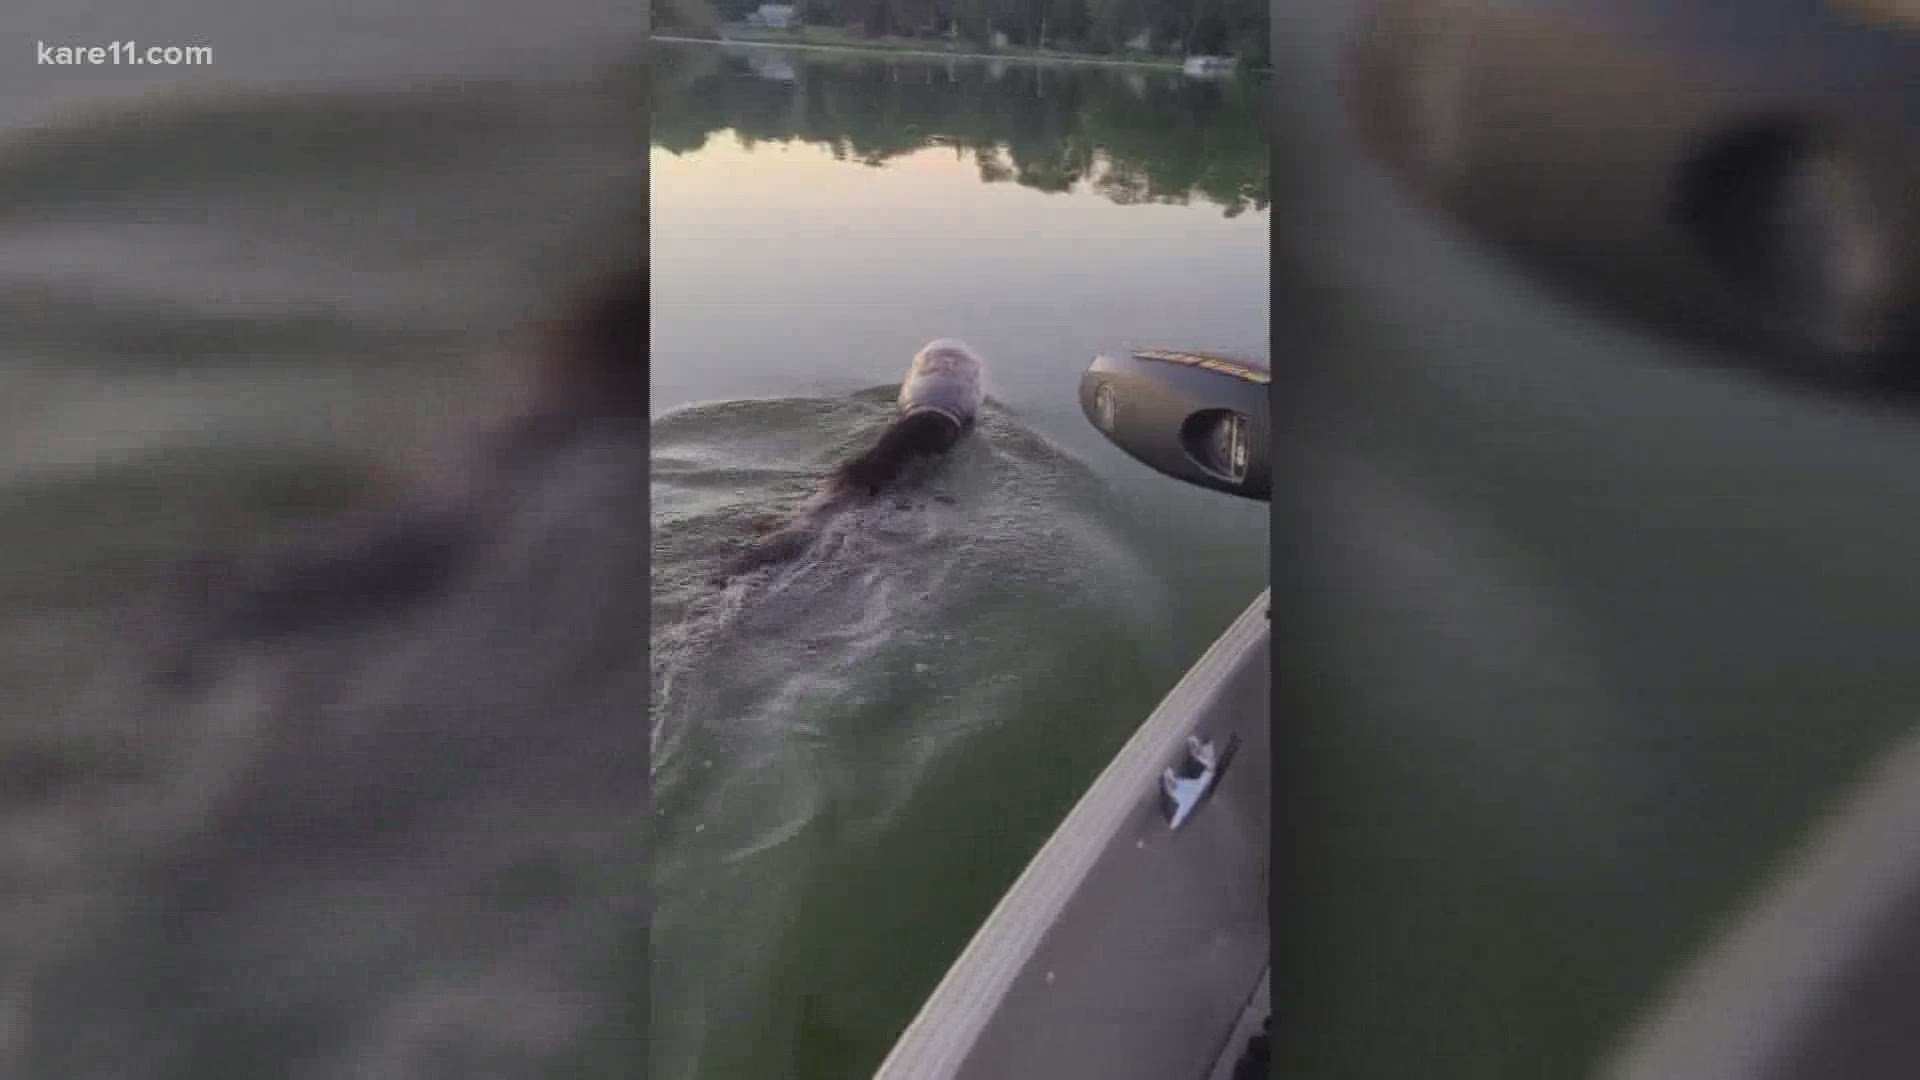 Boaters were able to pull the Cheese Balls container off this swimmer's head